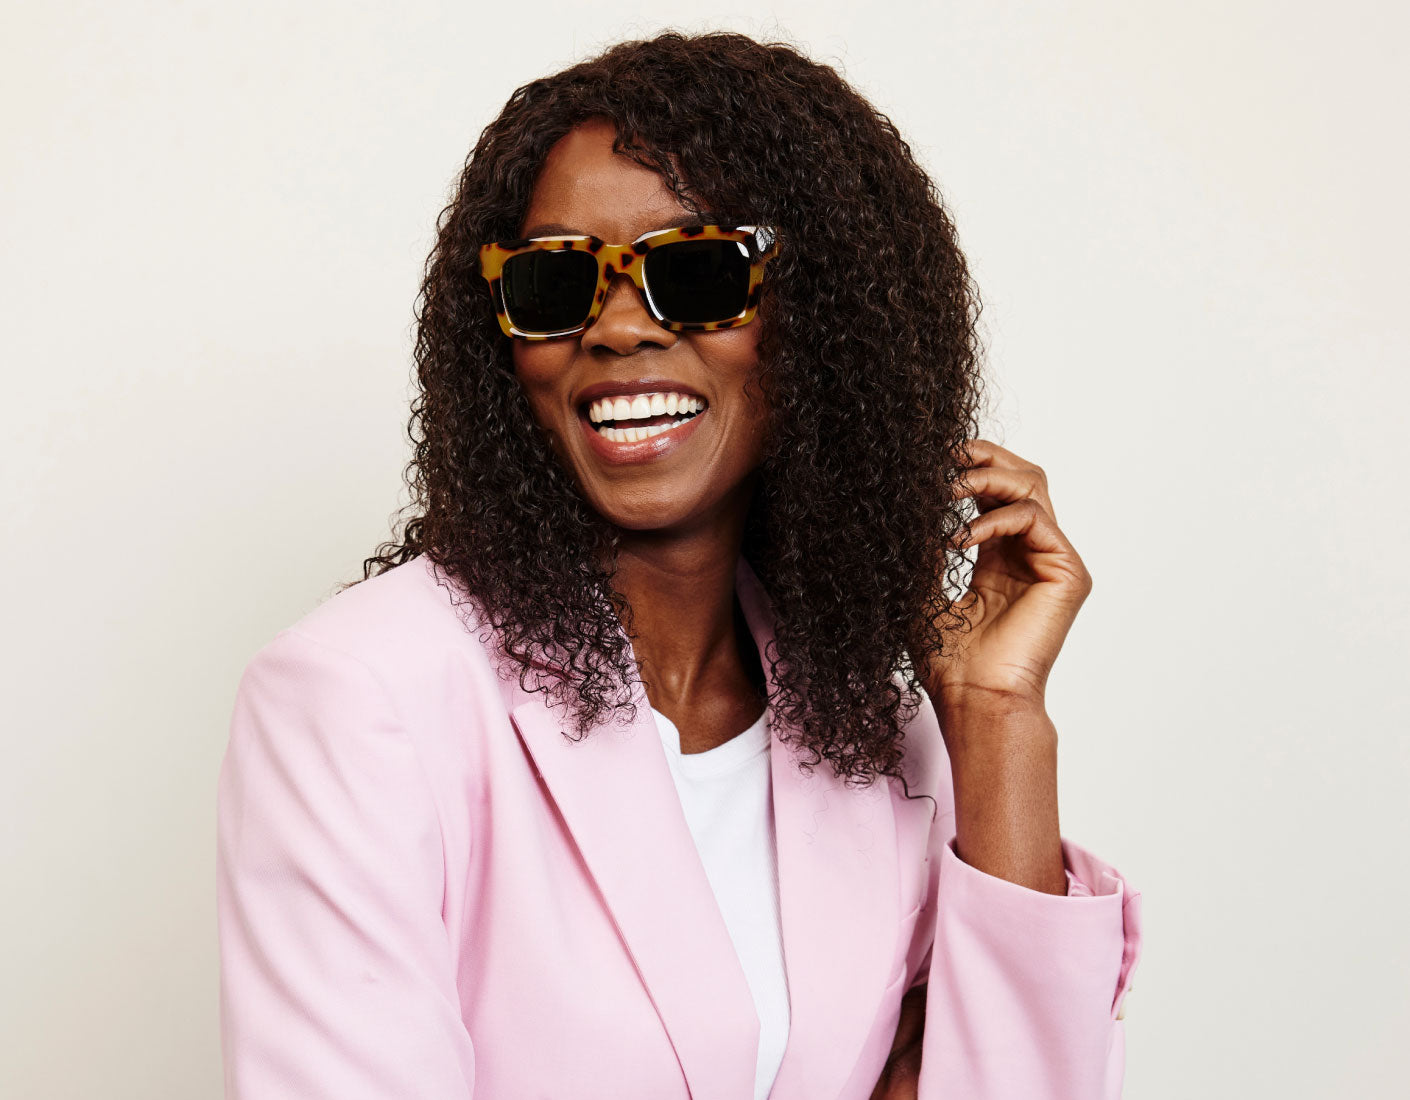 Sunglasses, What's New Picks of the Month